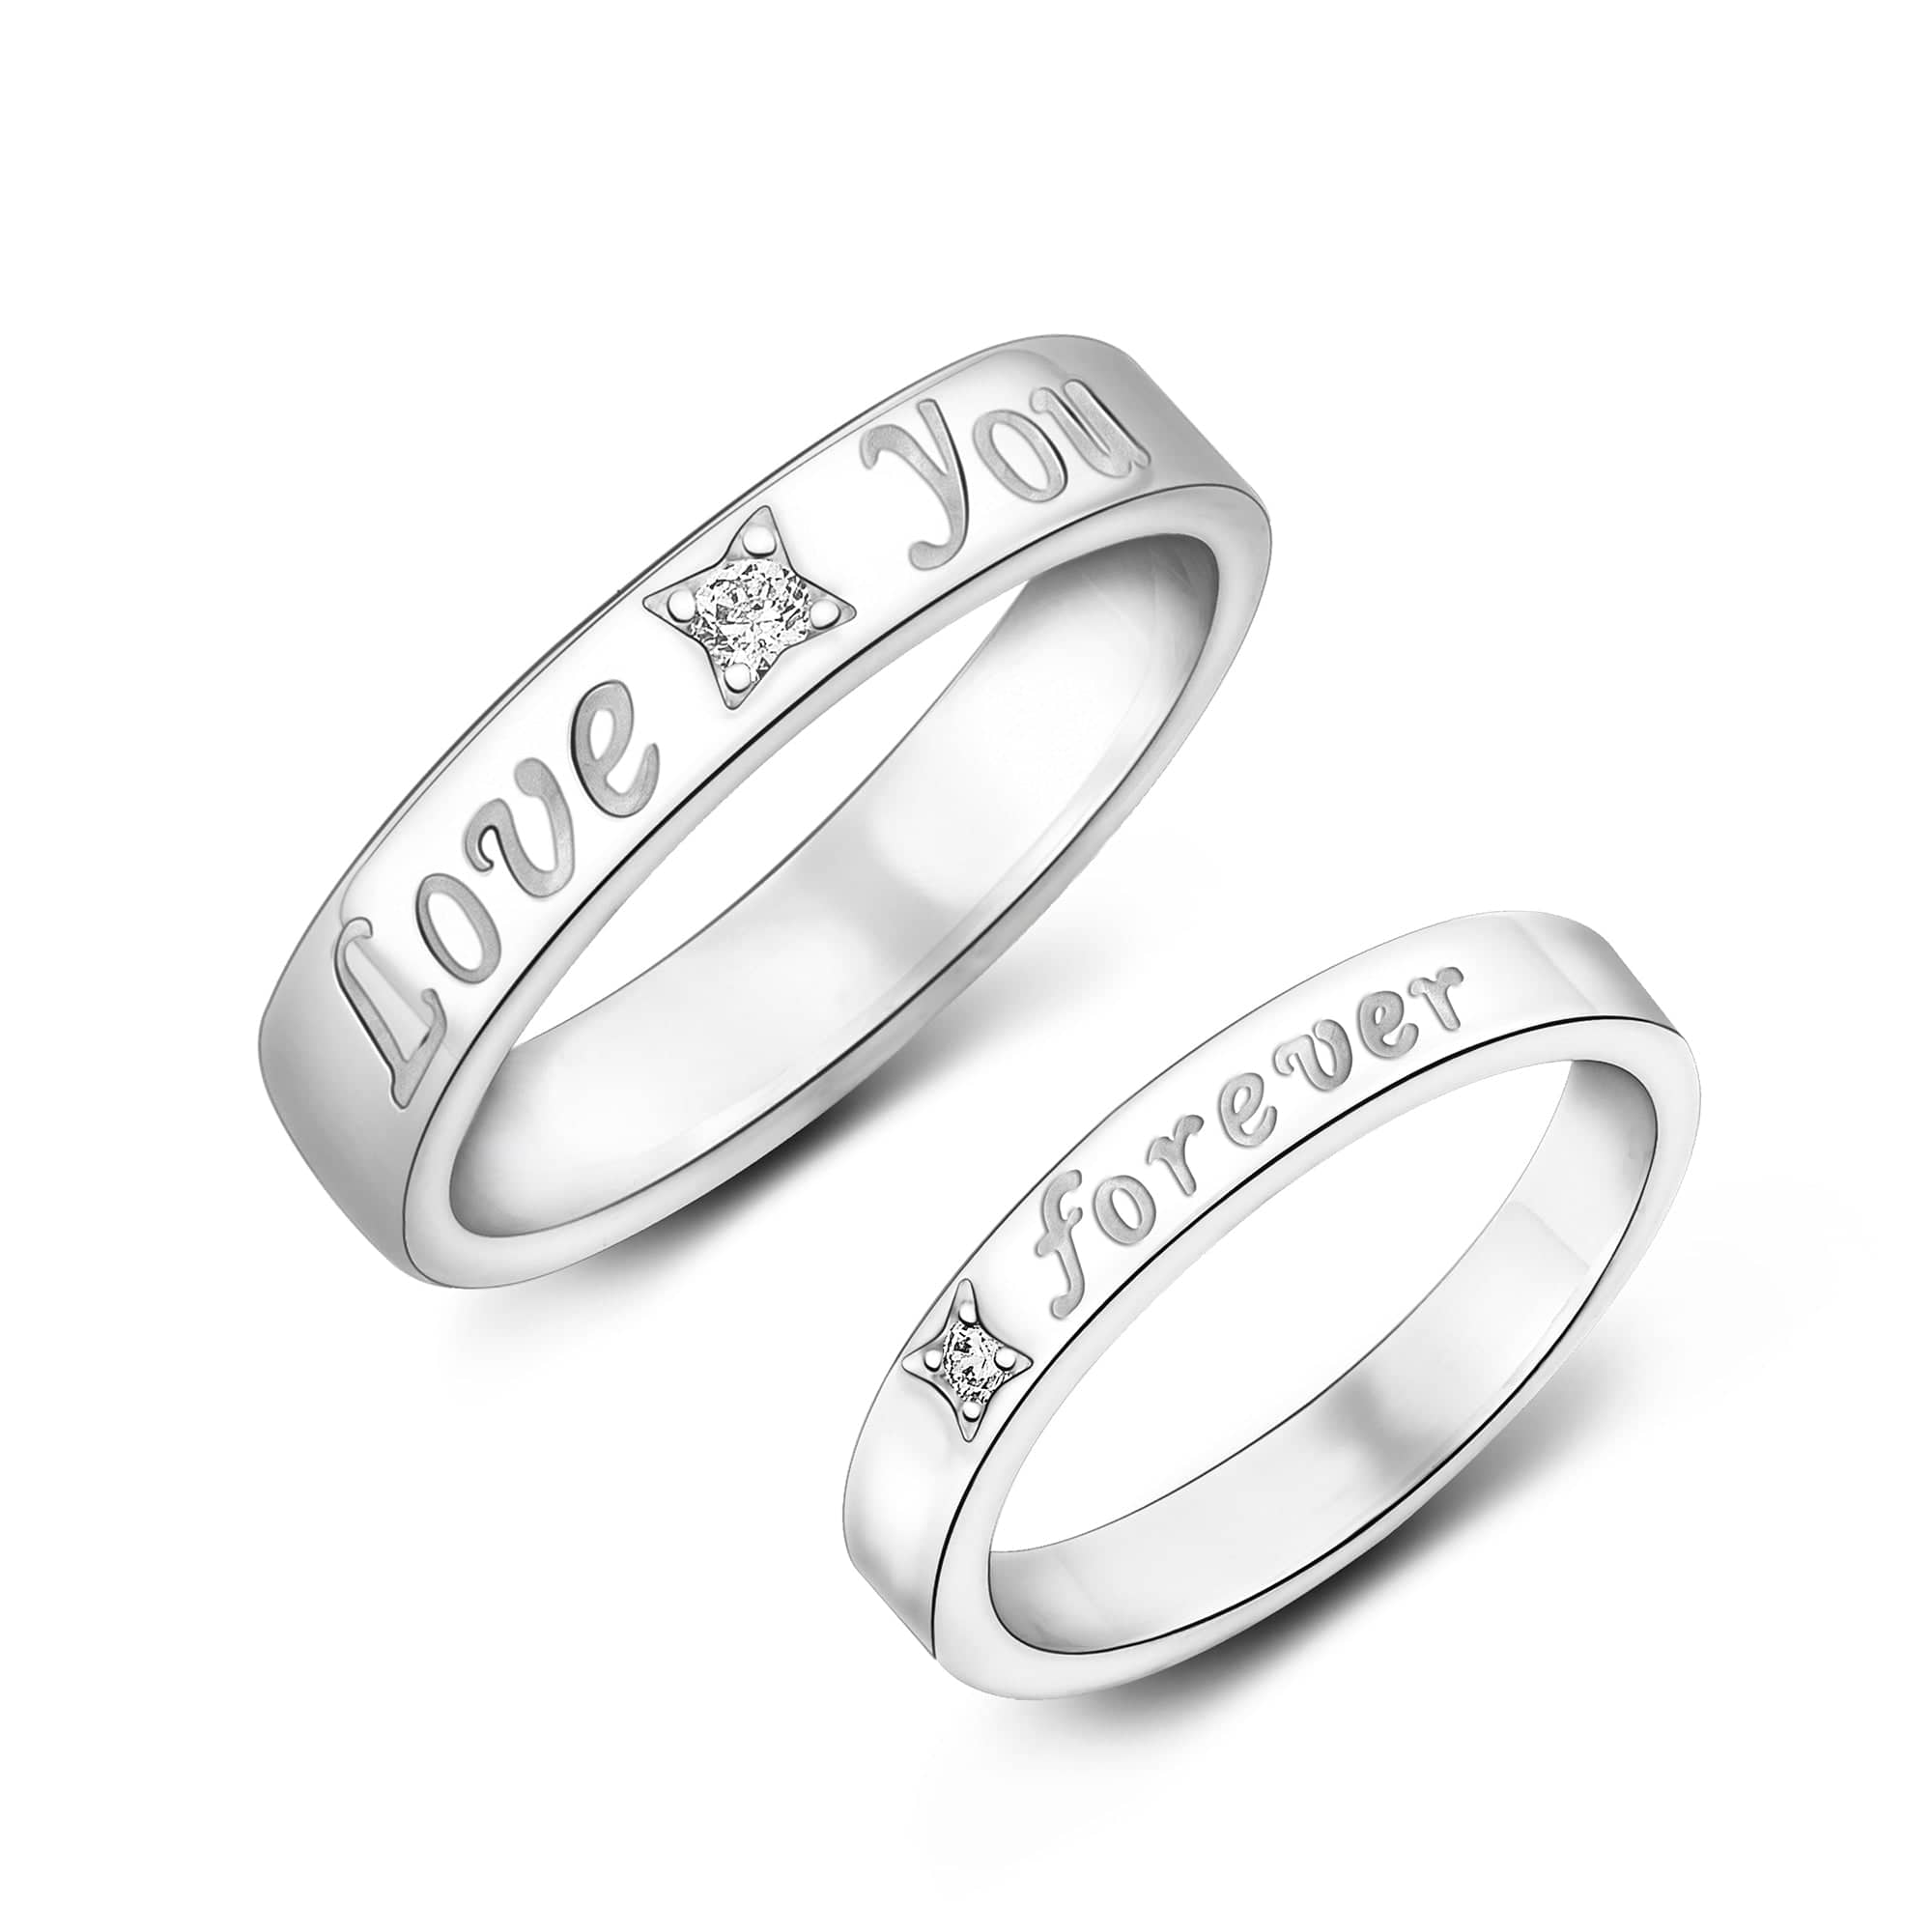 Buy Dainty Heart Couple Ring Matching Heart Ring for Couples Heart Promise  Ring Set Gifts for Girlfriend/Boyfriend Silver at Amazon.in